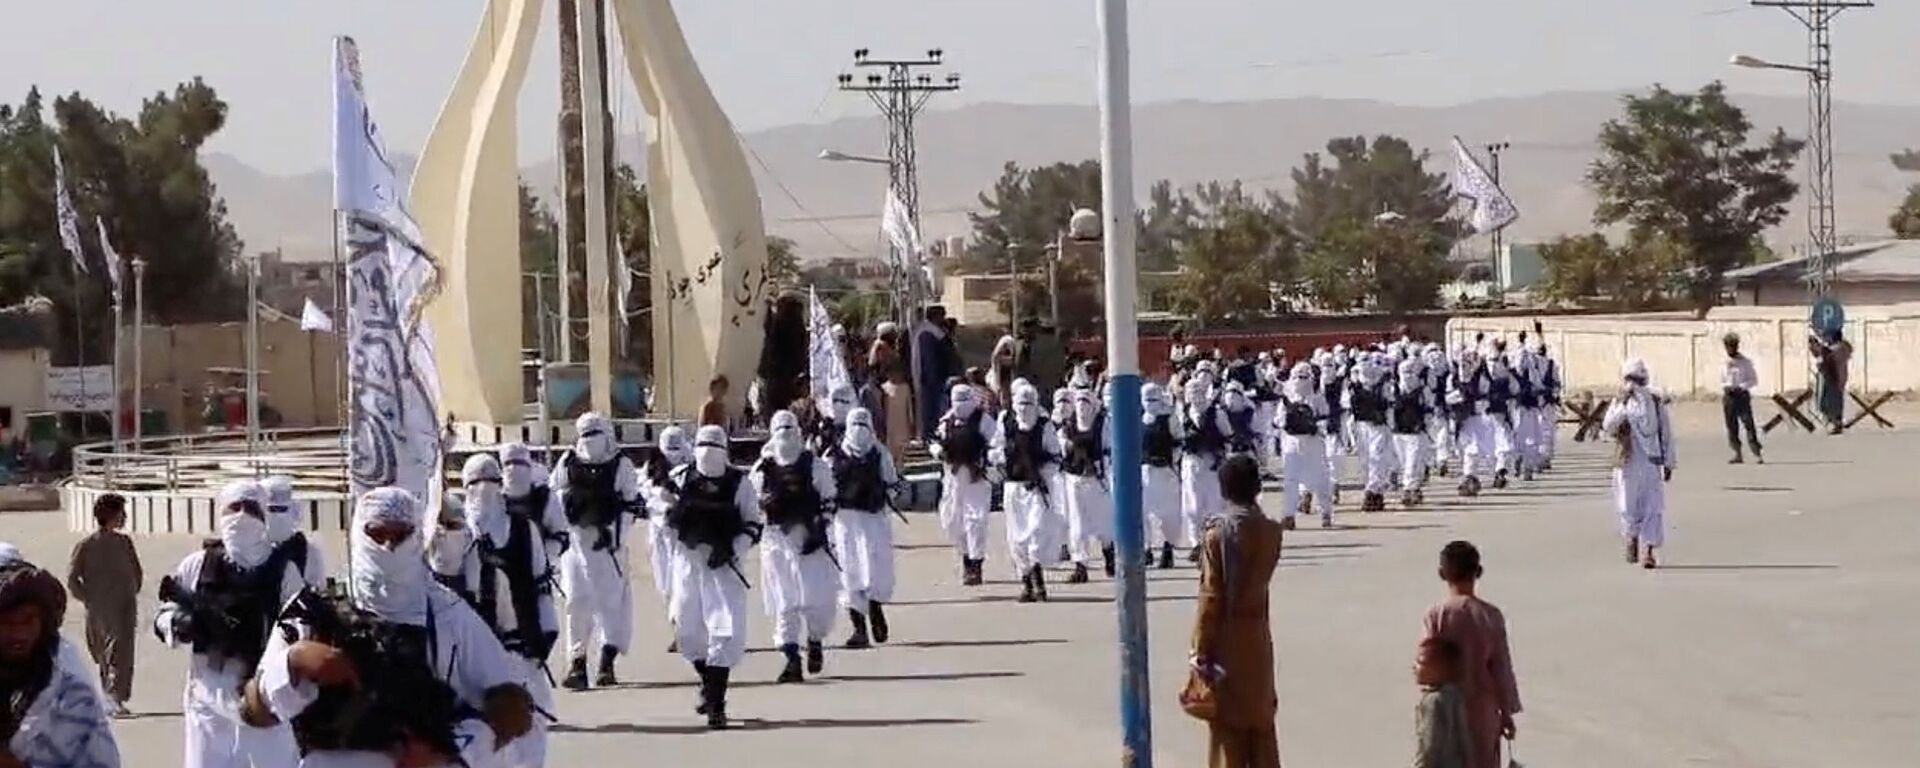 Taliban fighters march in uniforms on the street in Qalat, Zabul Province, Afghanistan, in this still image taken from social media video uploaded August 19, 2021 and obtained by REUTERS - Sputnik International, 1920